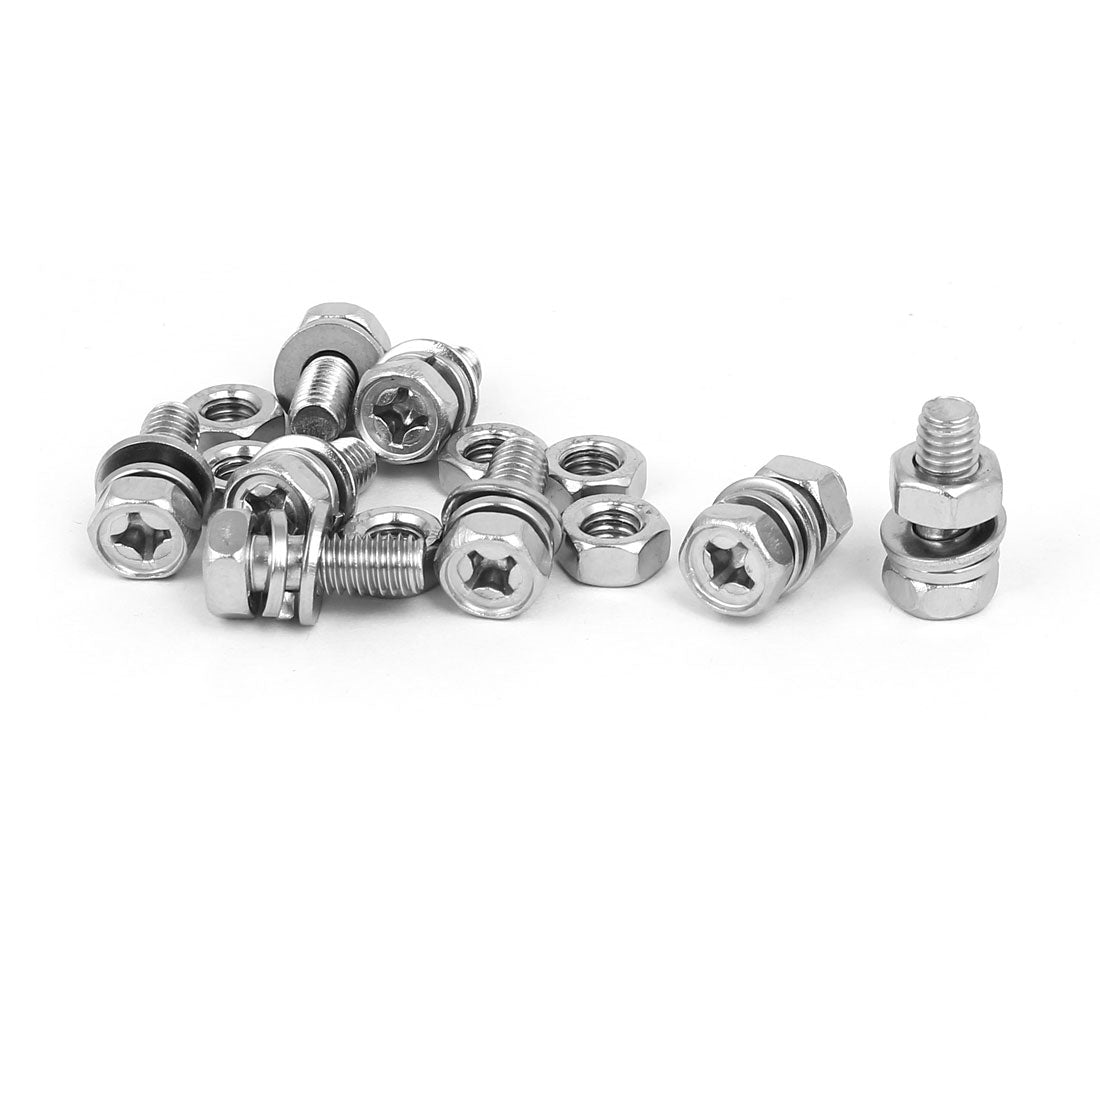 uxcell Uxcell M6 x 16mm 304 Stainless Steel Phillips Hex Head Bolts Nuts w Washers 8 Sets